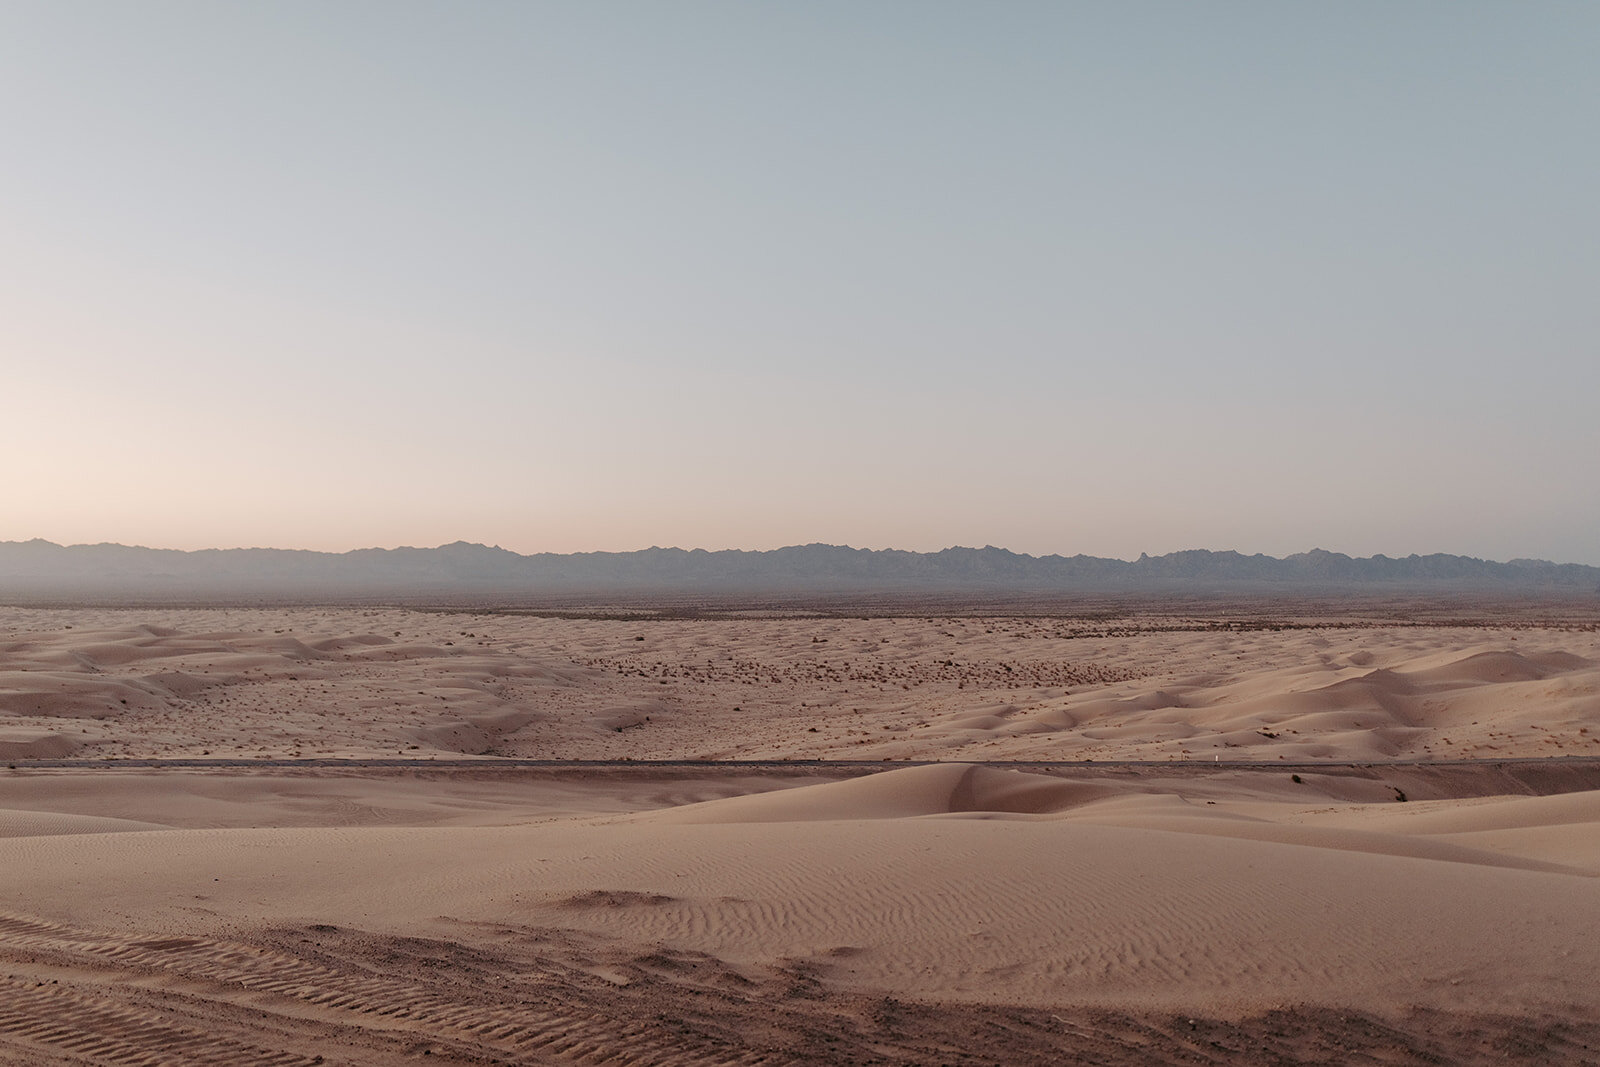 The Imperial Sand Dunes are just a day trip away from major cities